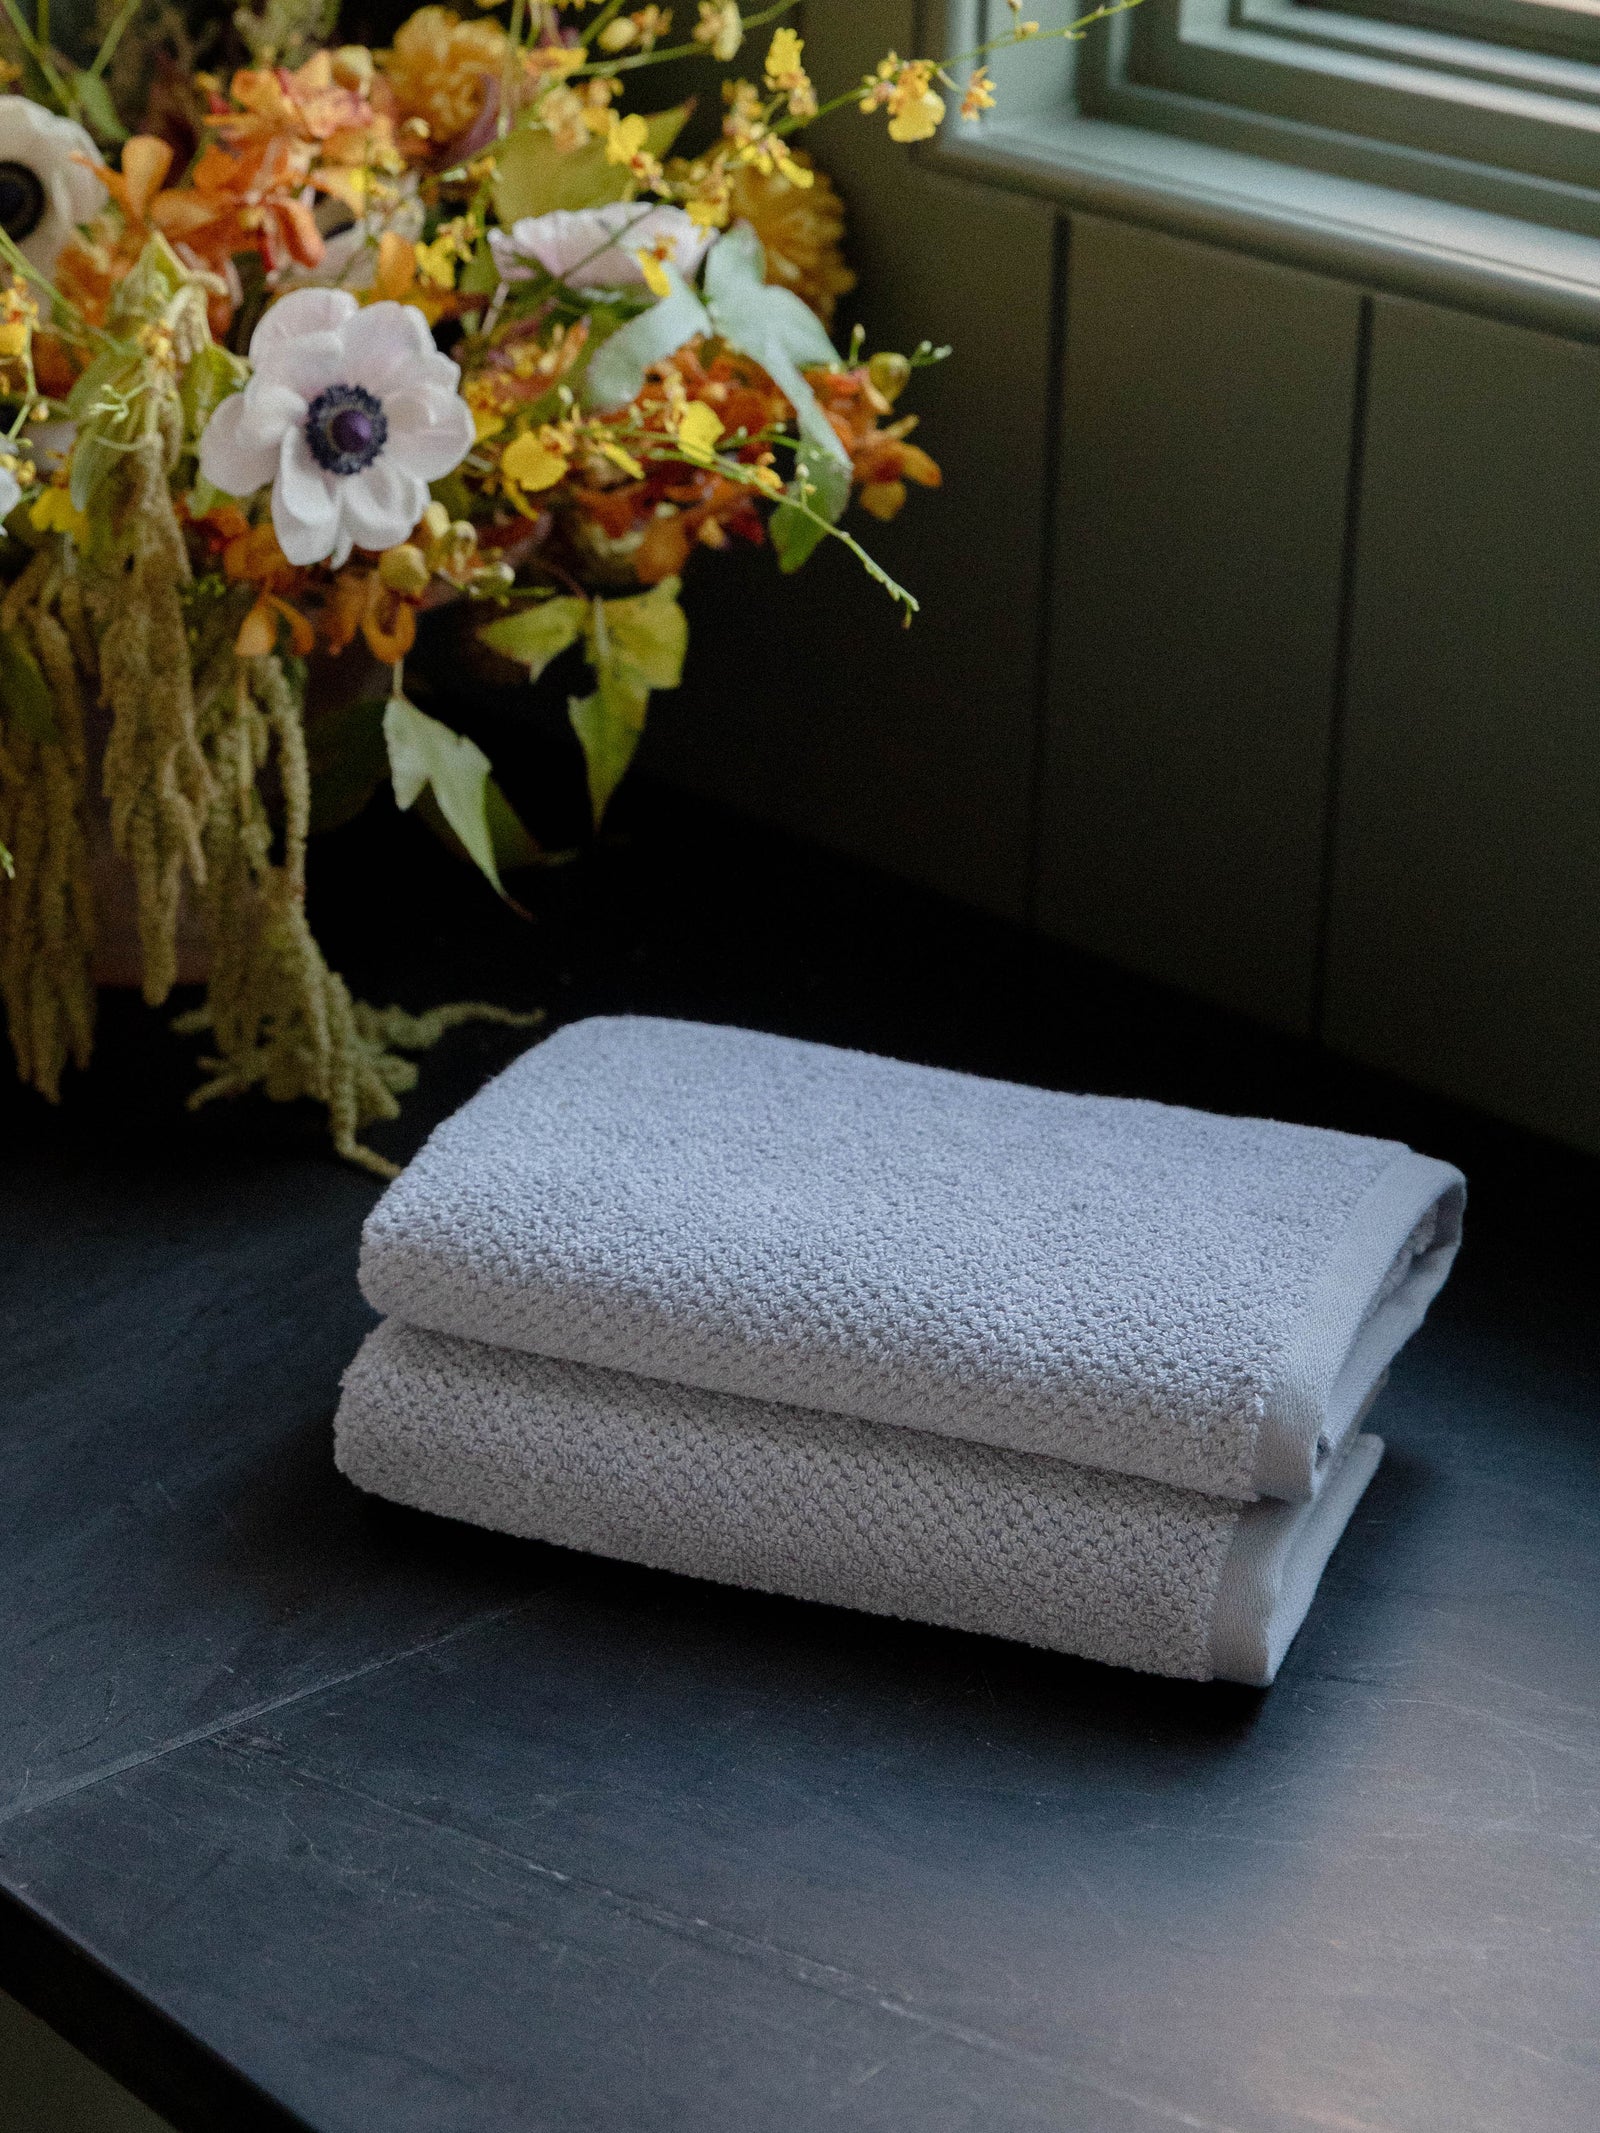 Nantucket Hand Towels in the color Heathered Harbor Mist. Photo of Nantucket Hand Towels taken with the bath towels resting on a countertop in a bathroom. 